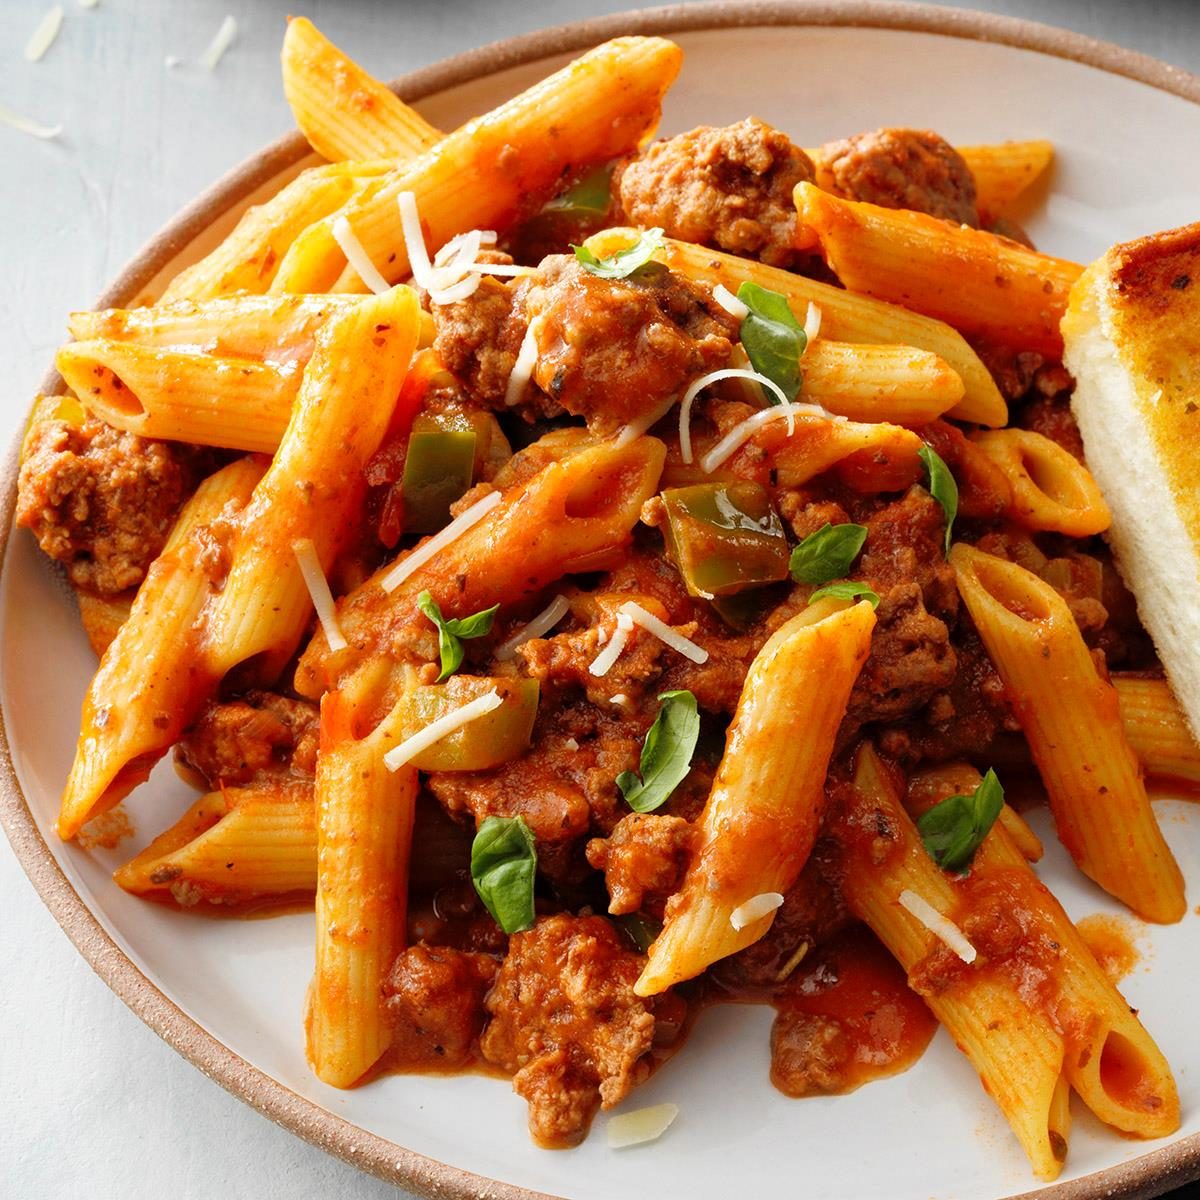 How to make penne pasta 